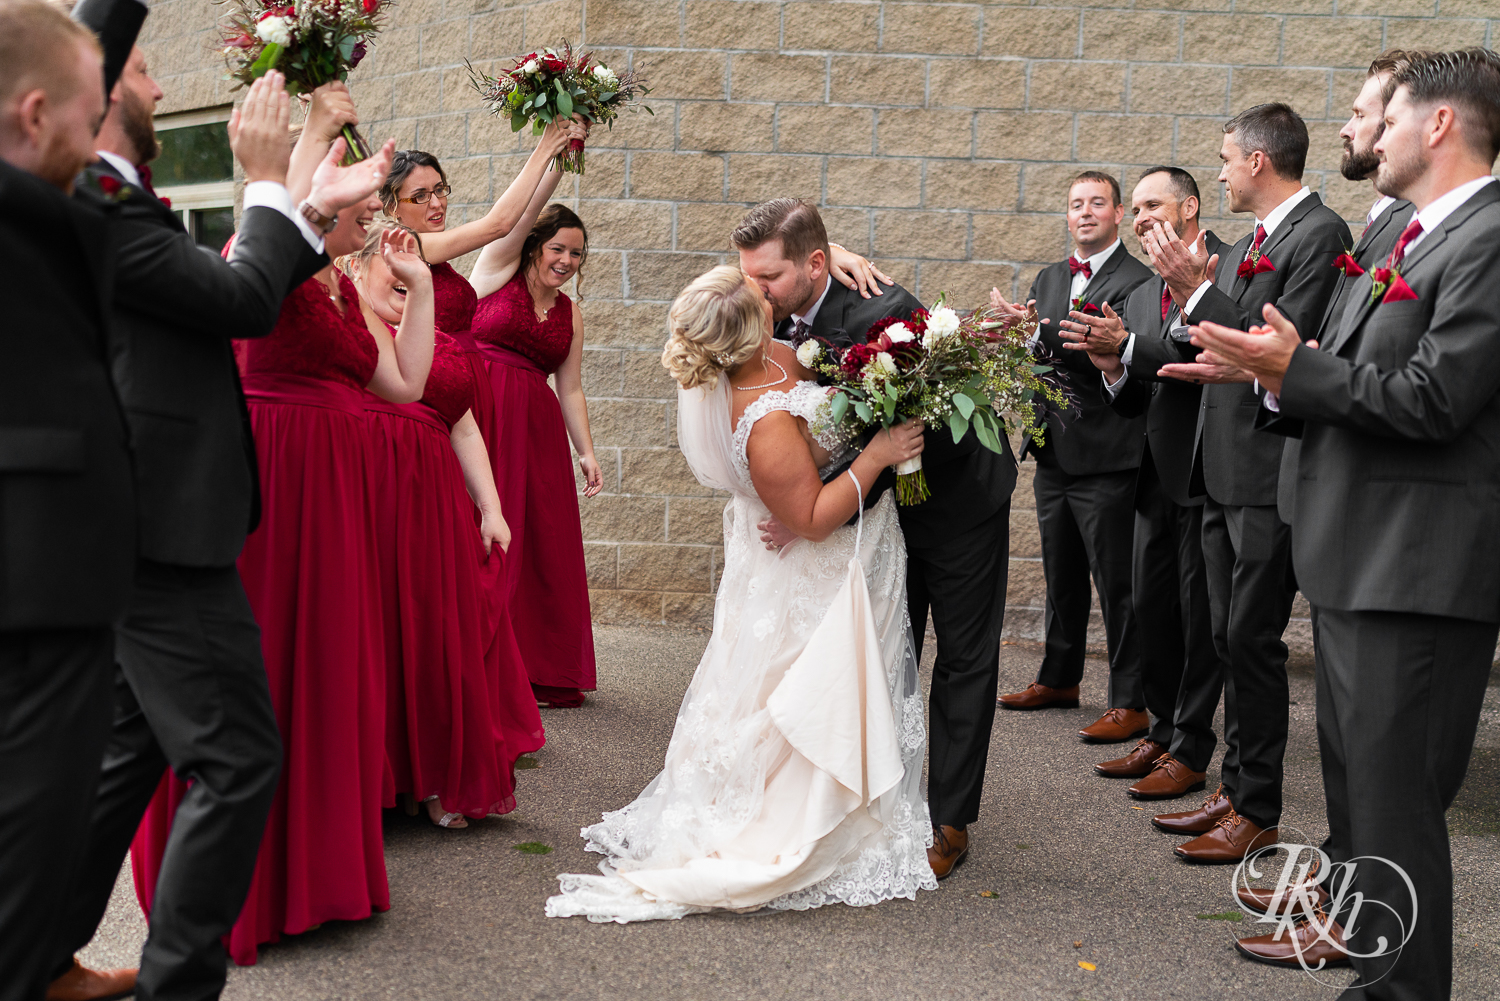 Wedding party in red dresses and gray suits surround kissing couple at Hastings Golf Club in Hastings, Minnesota.